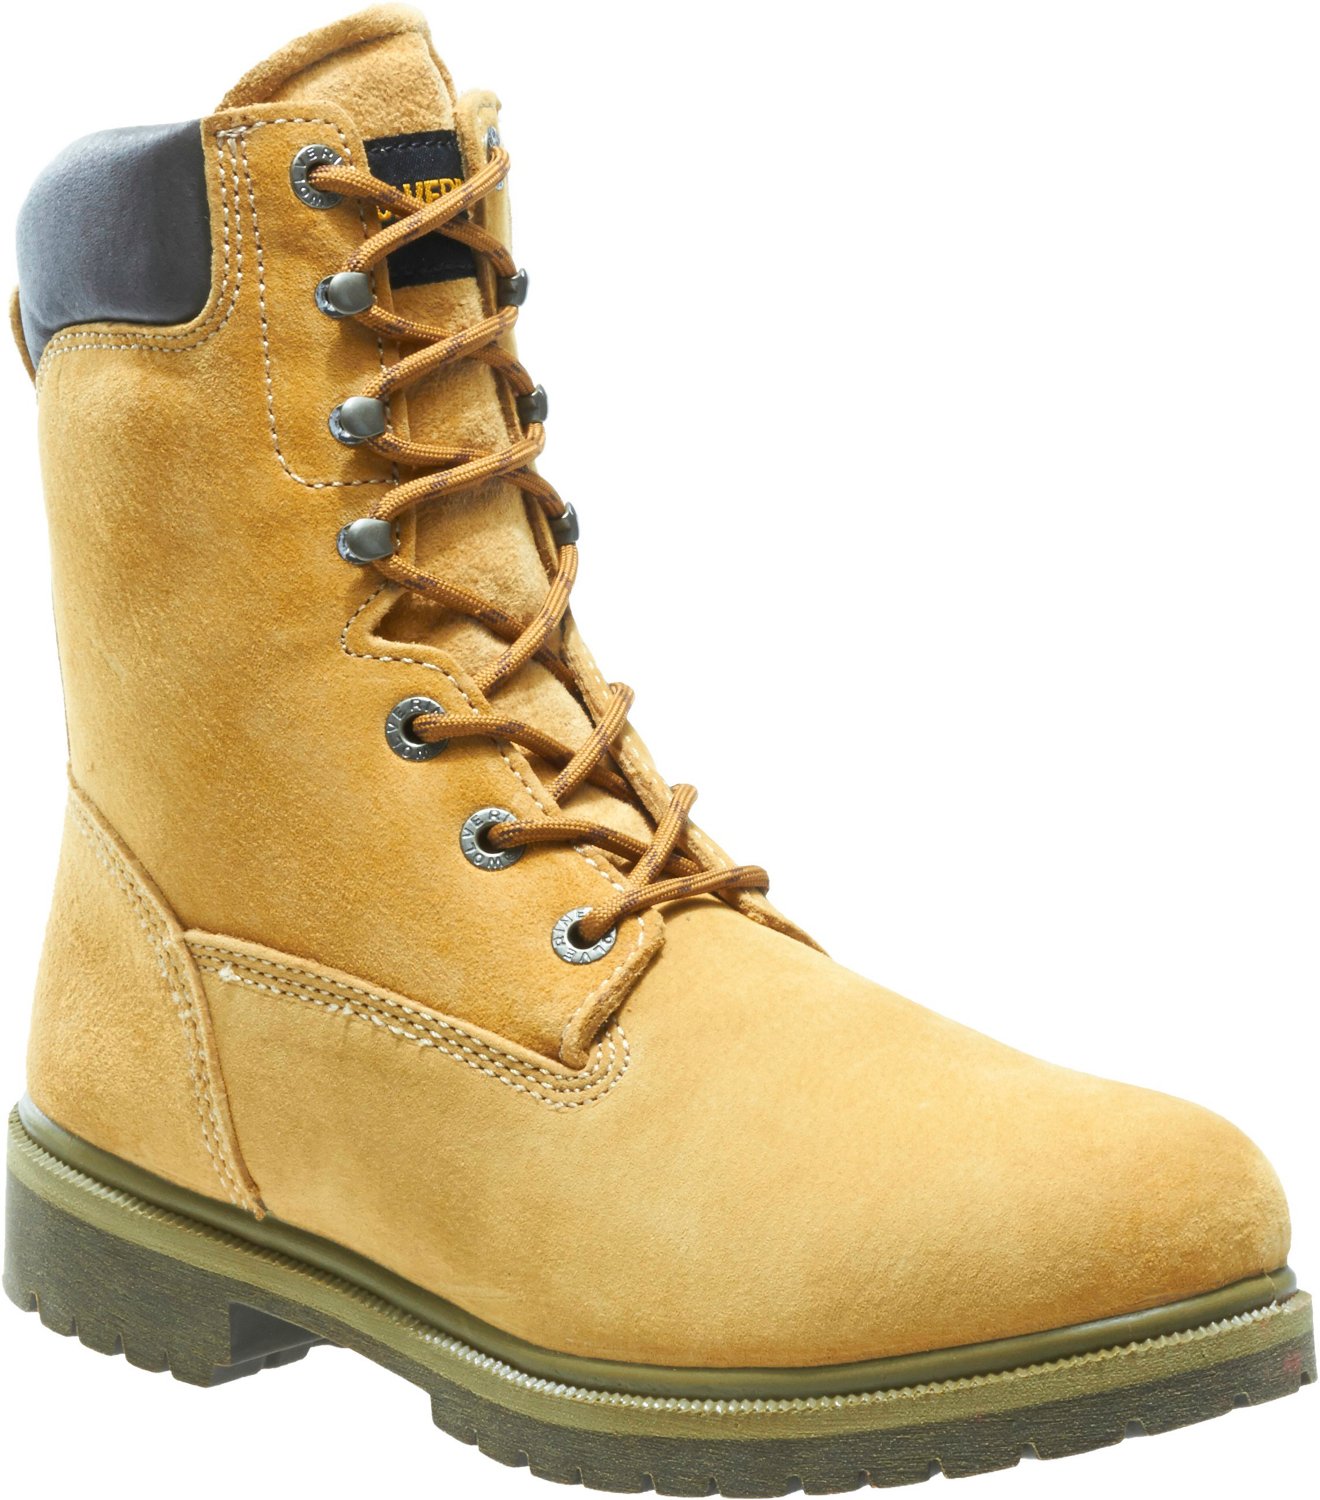 Wolverine Men's Gold Waterproof Insulated 8 in Lace Up Work Boots | Academy